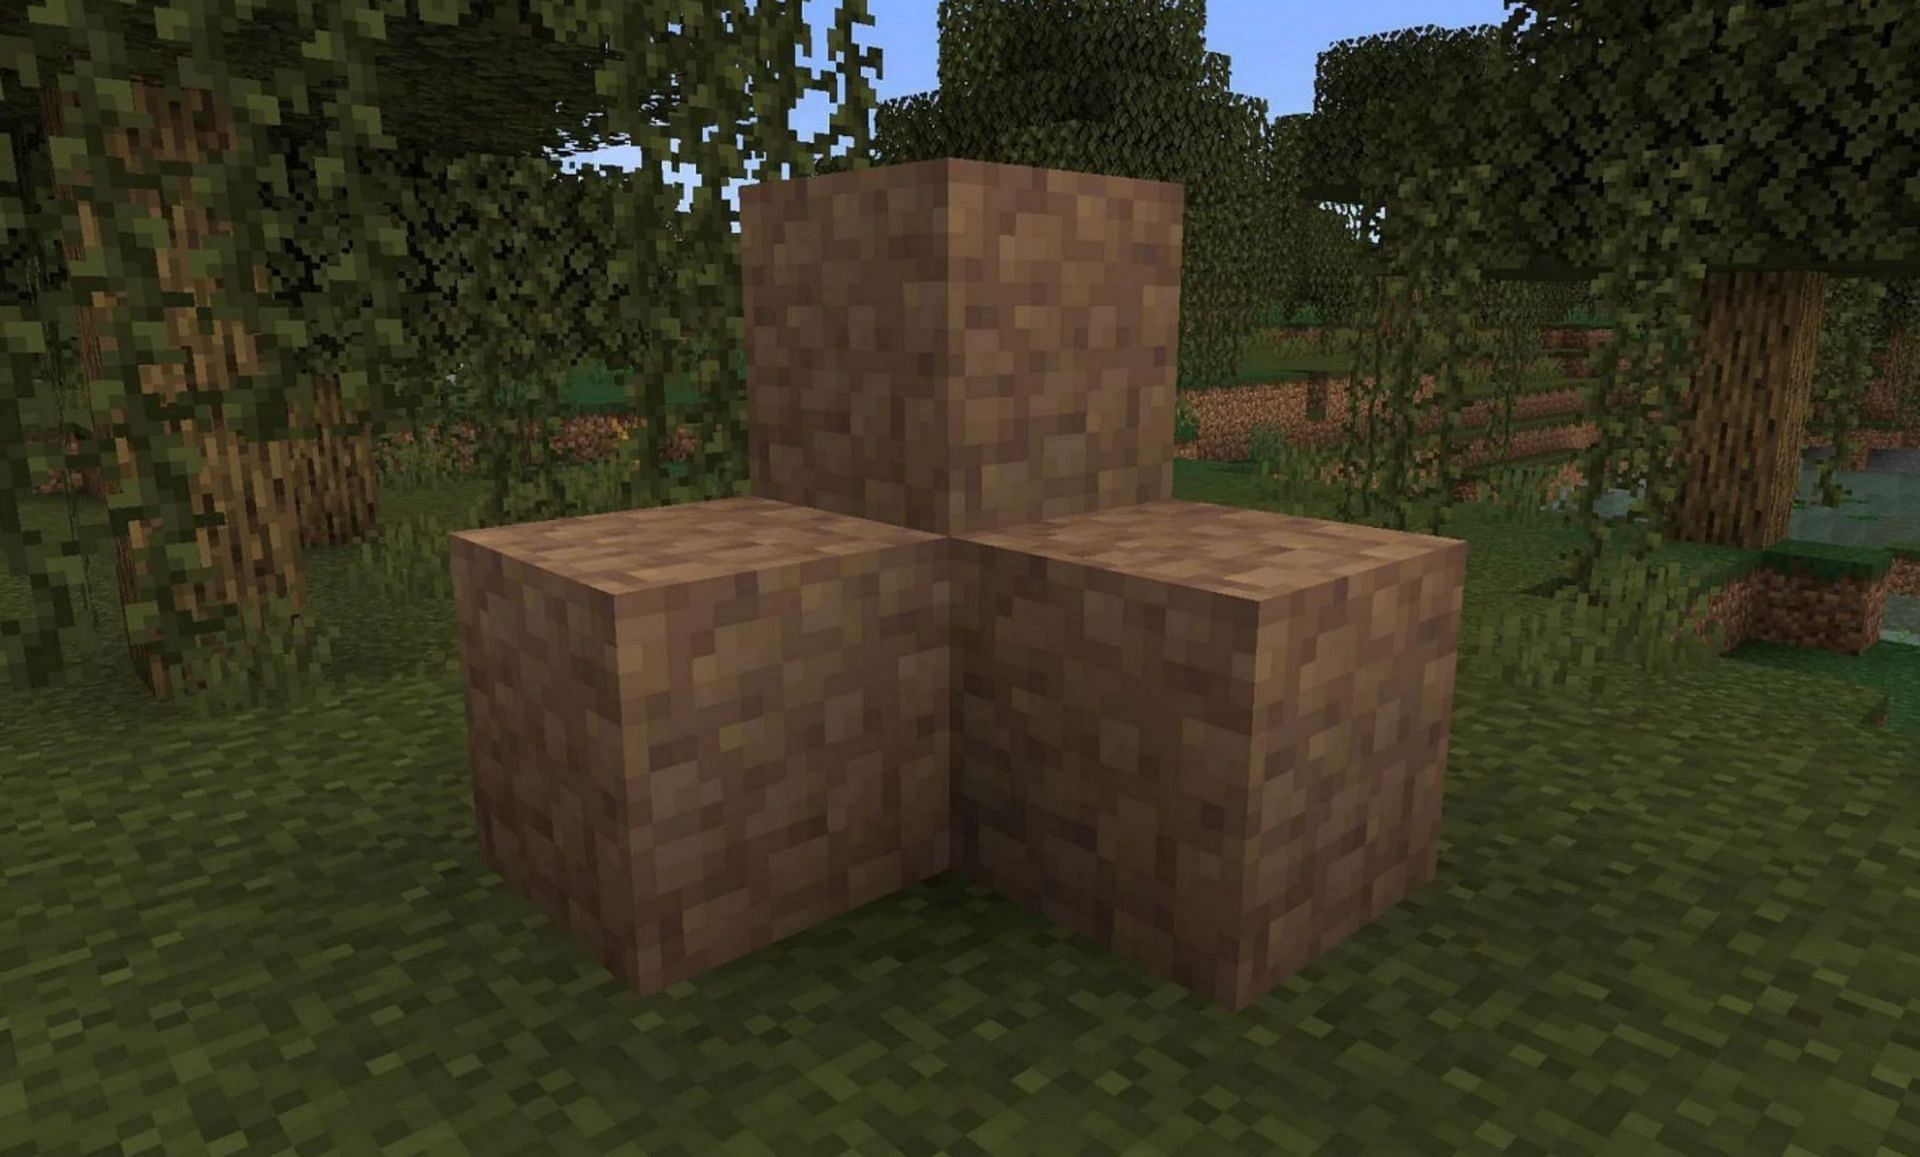 Mud blocks have some intriguing applications due to their non-solid status (Image via Mojang)